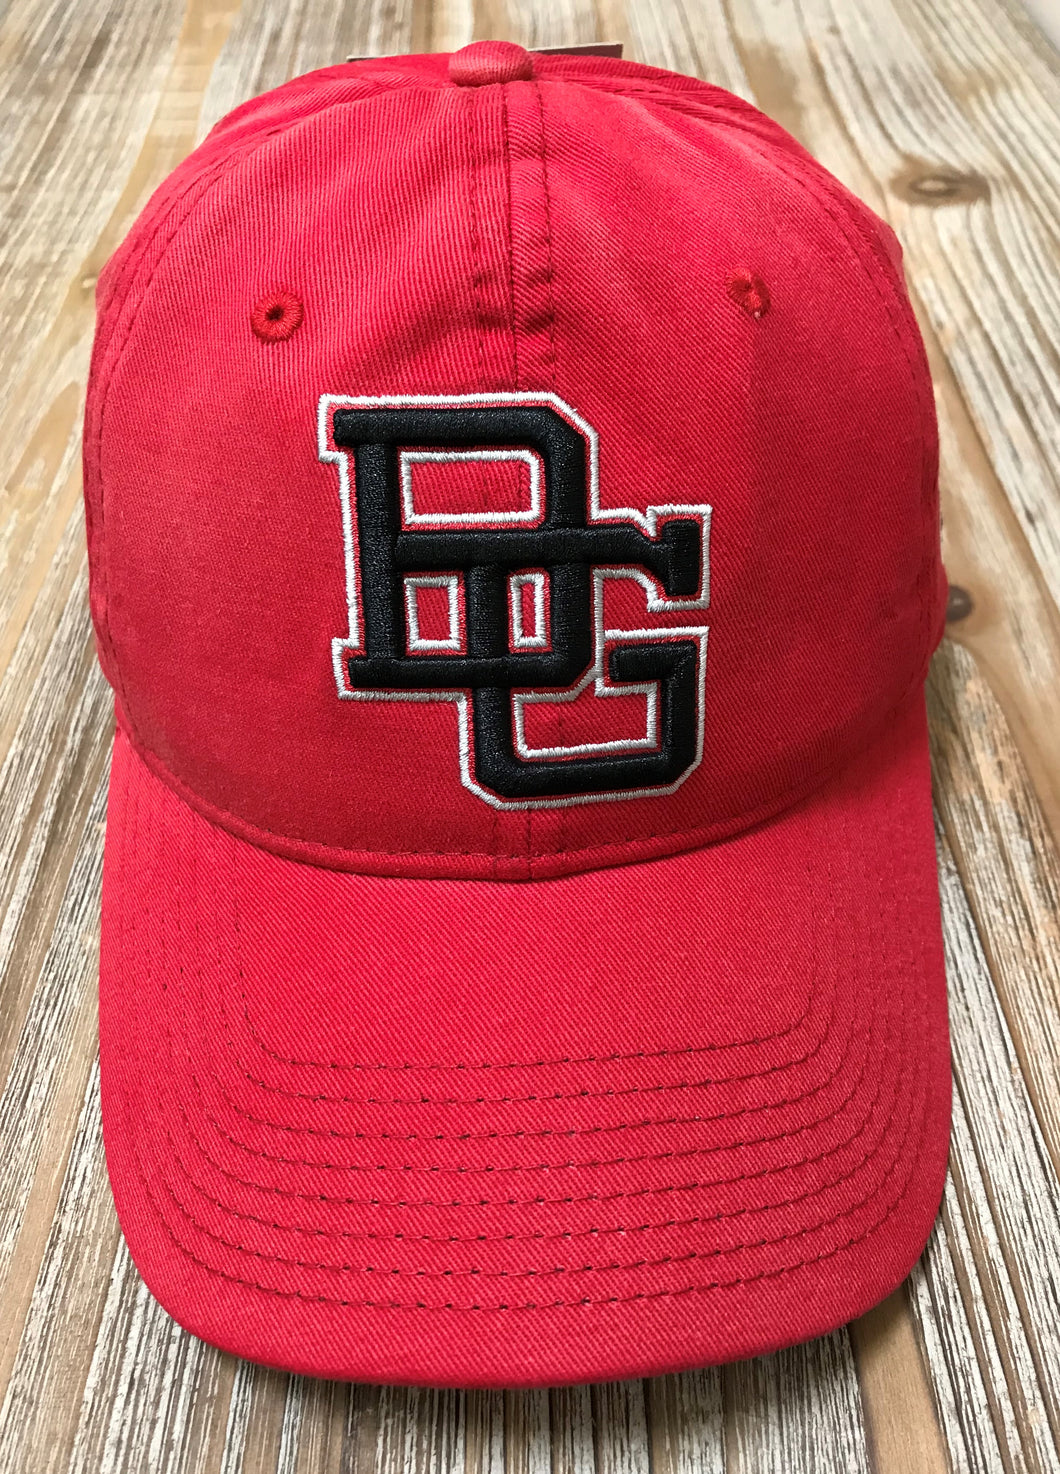 Game Fitted Hat Bobcats Red G164